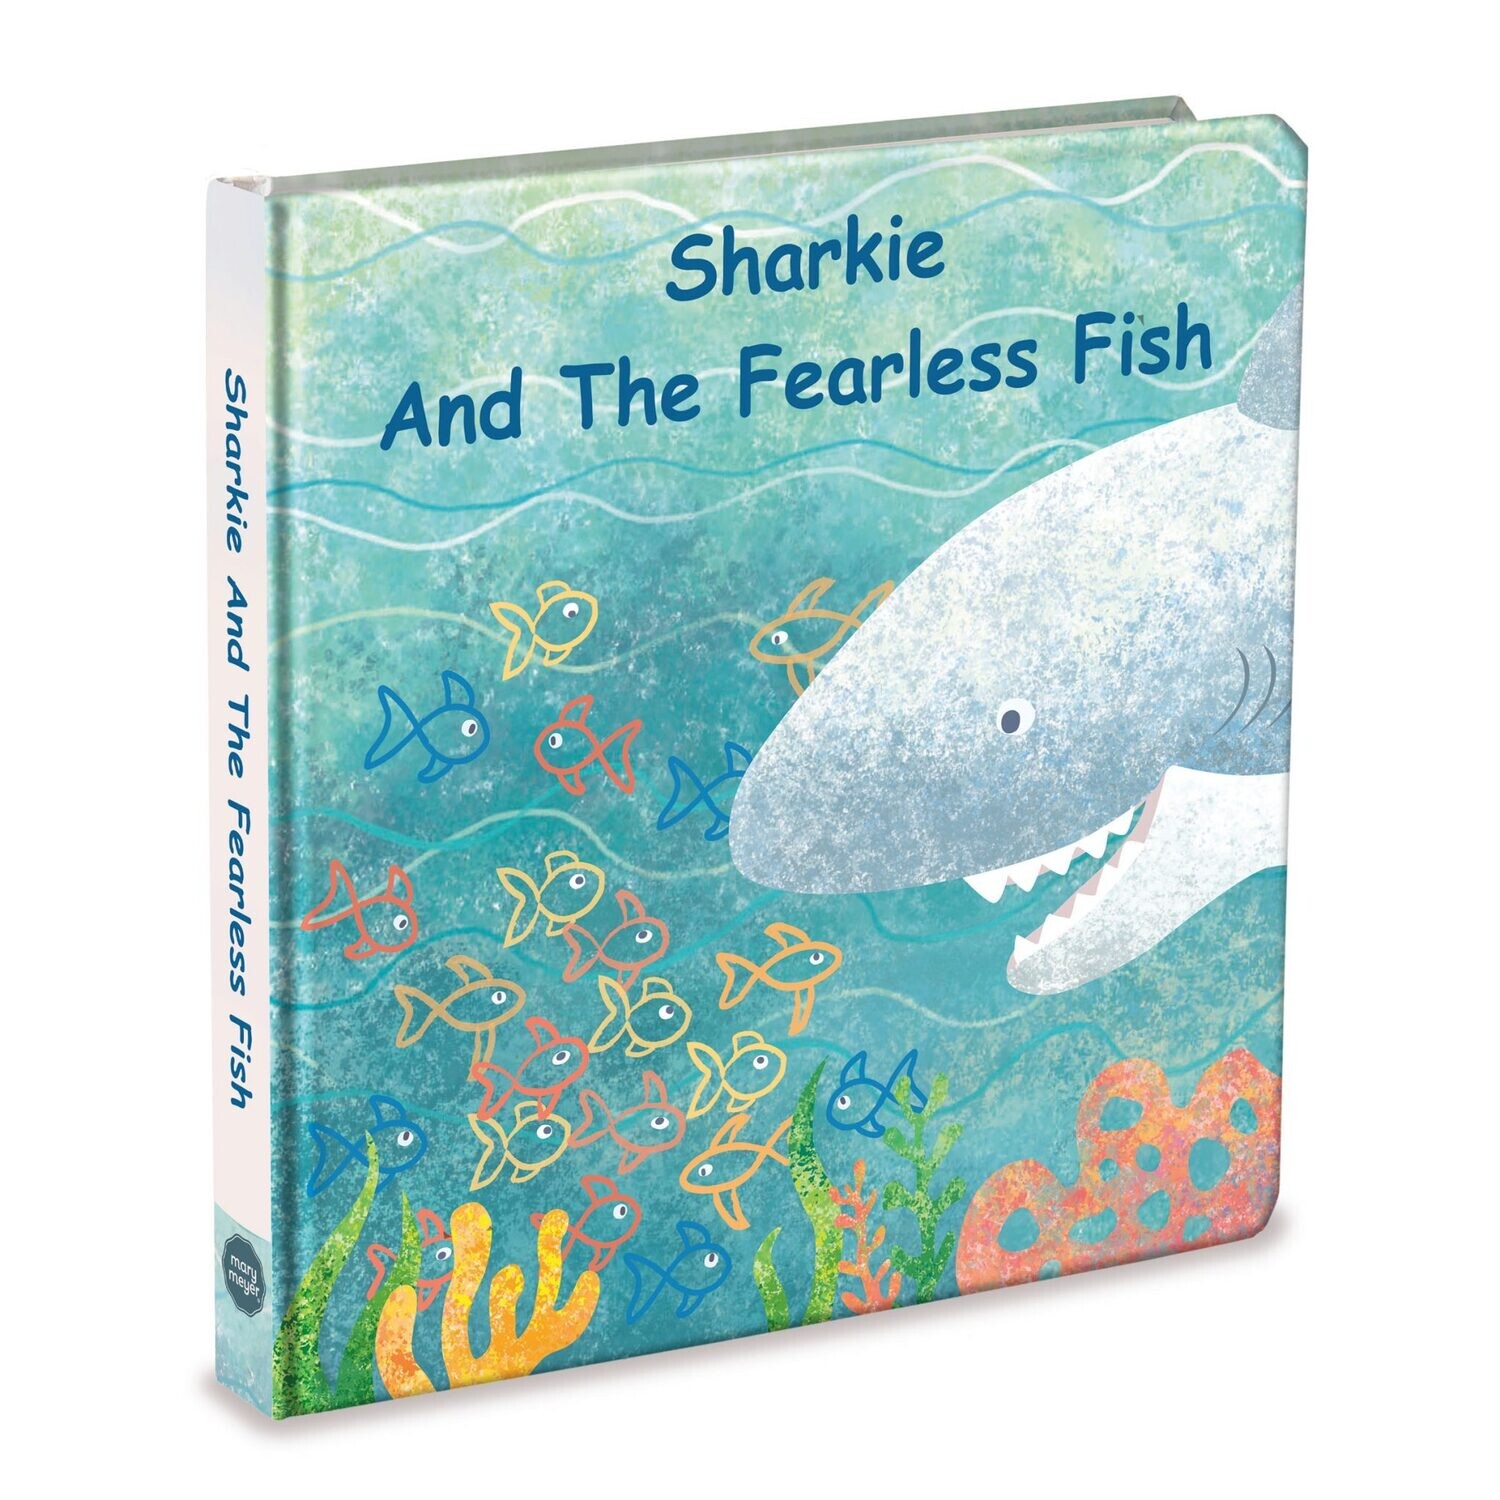 "Sharkie and the Fearless Fish" Book